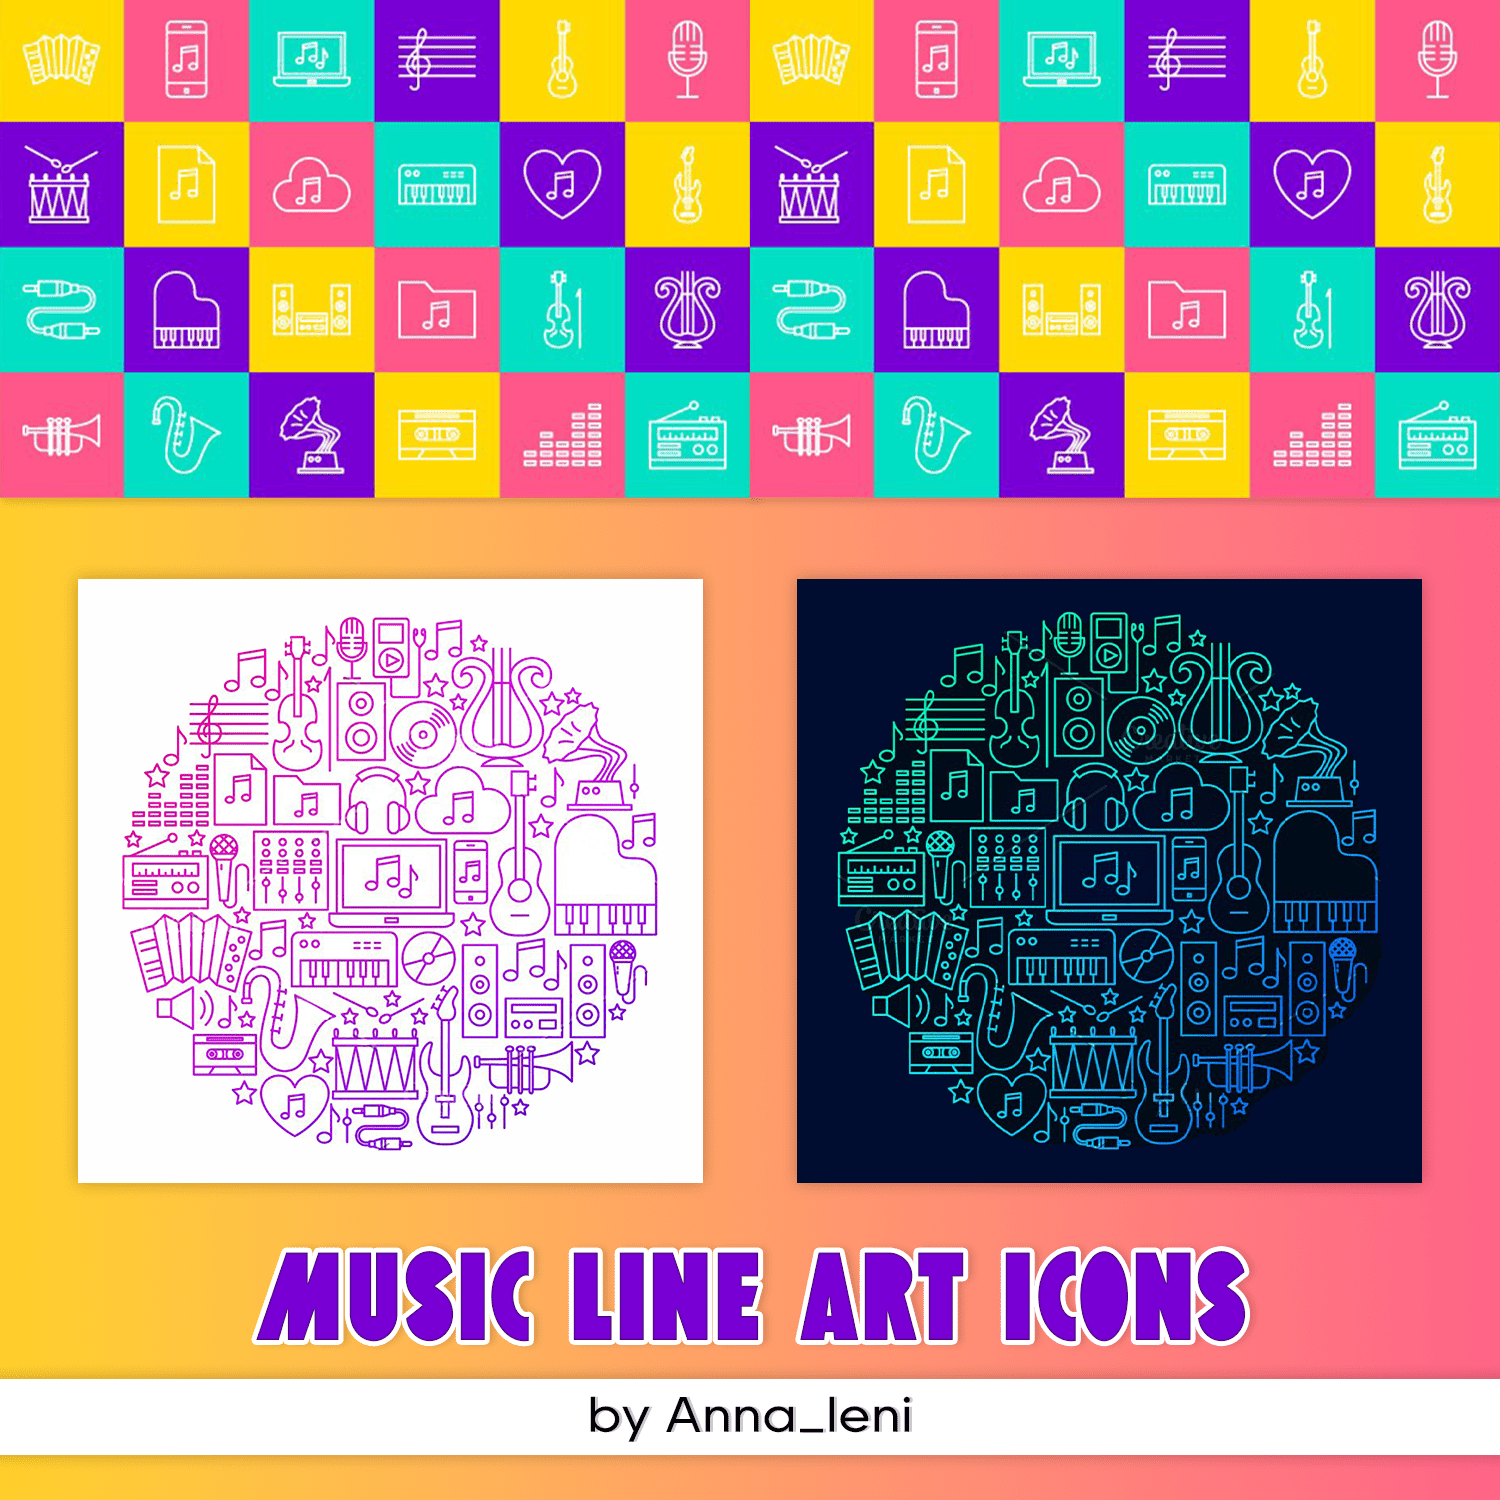 Music Line Art Icons cover.